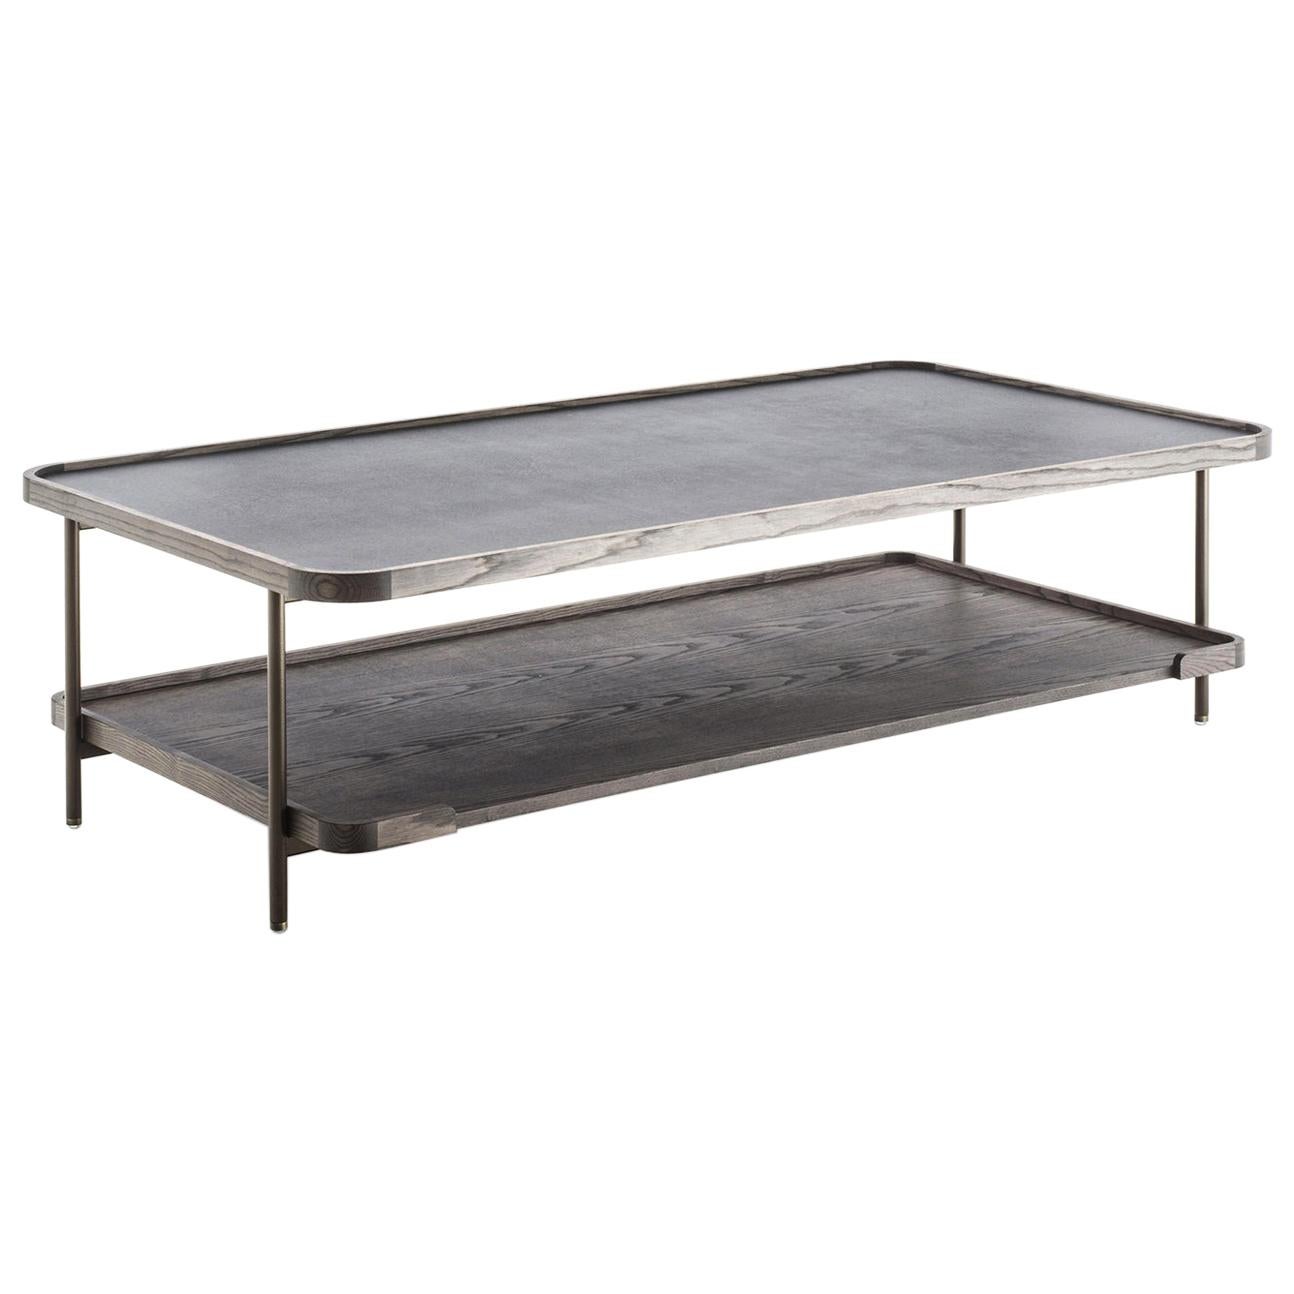 Table basse rectangulaire Kart